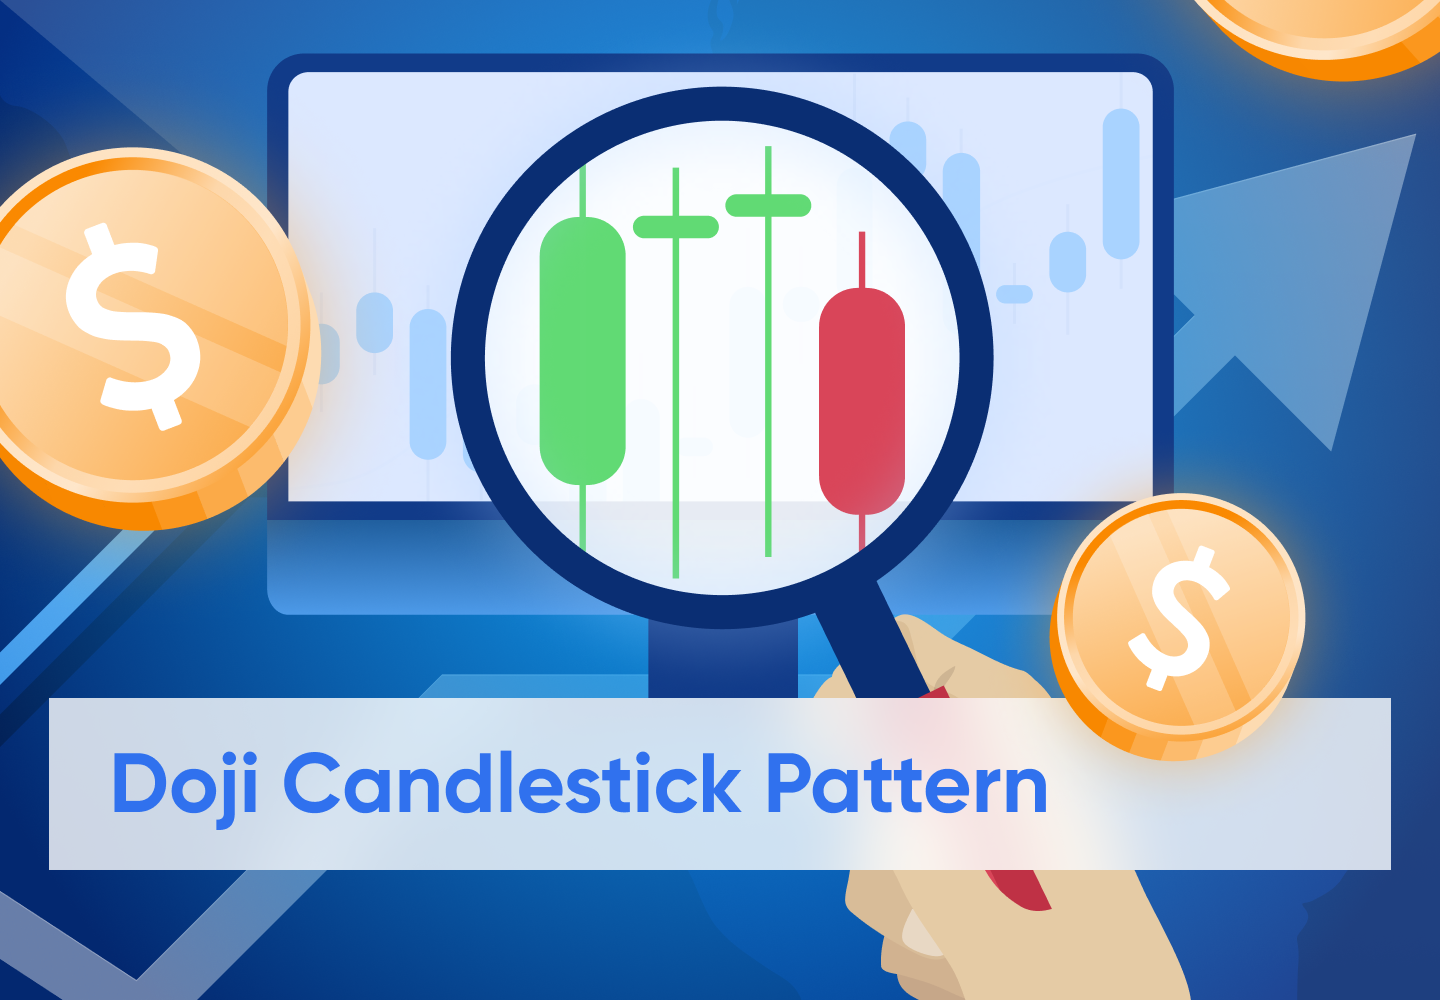 What Is A Doji Candlestick Pattern?